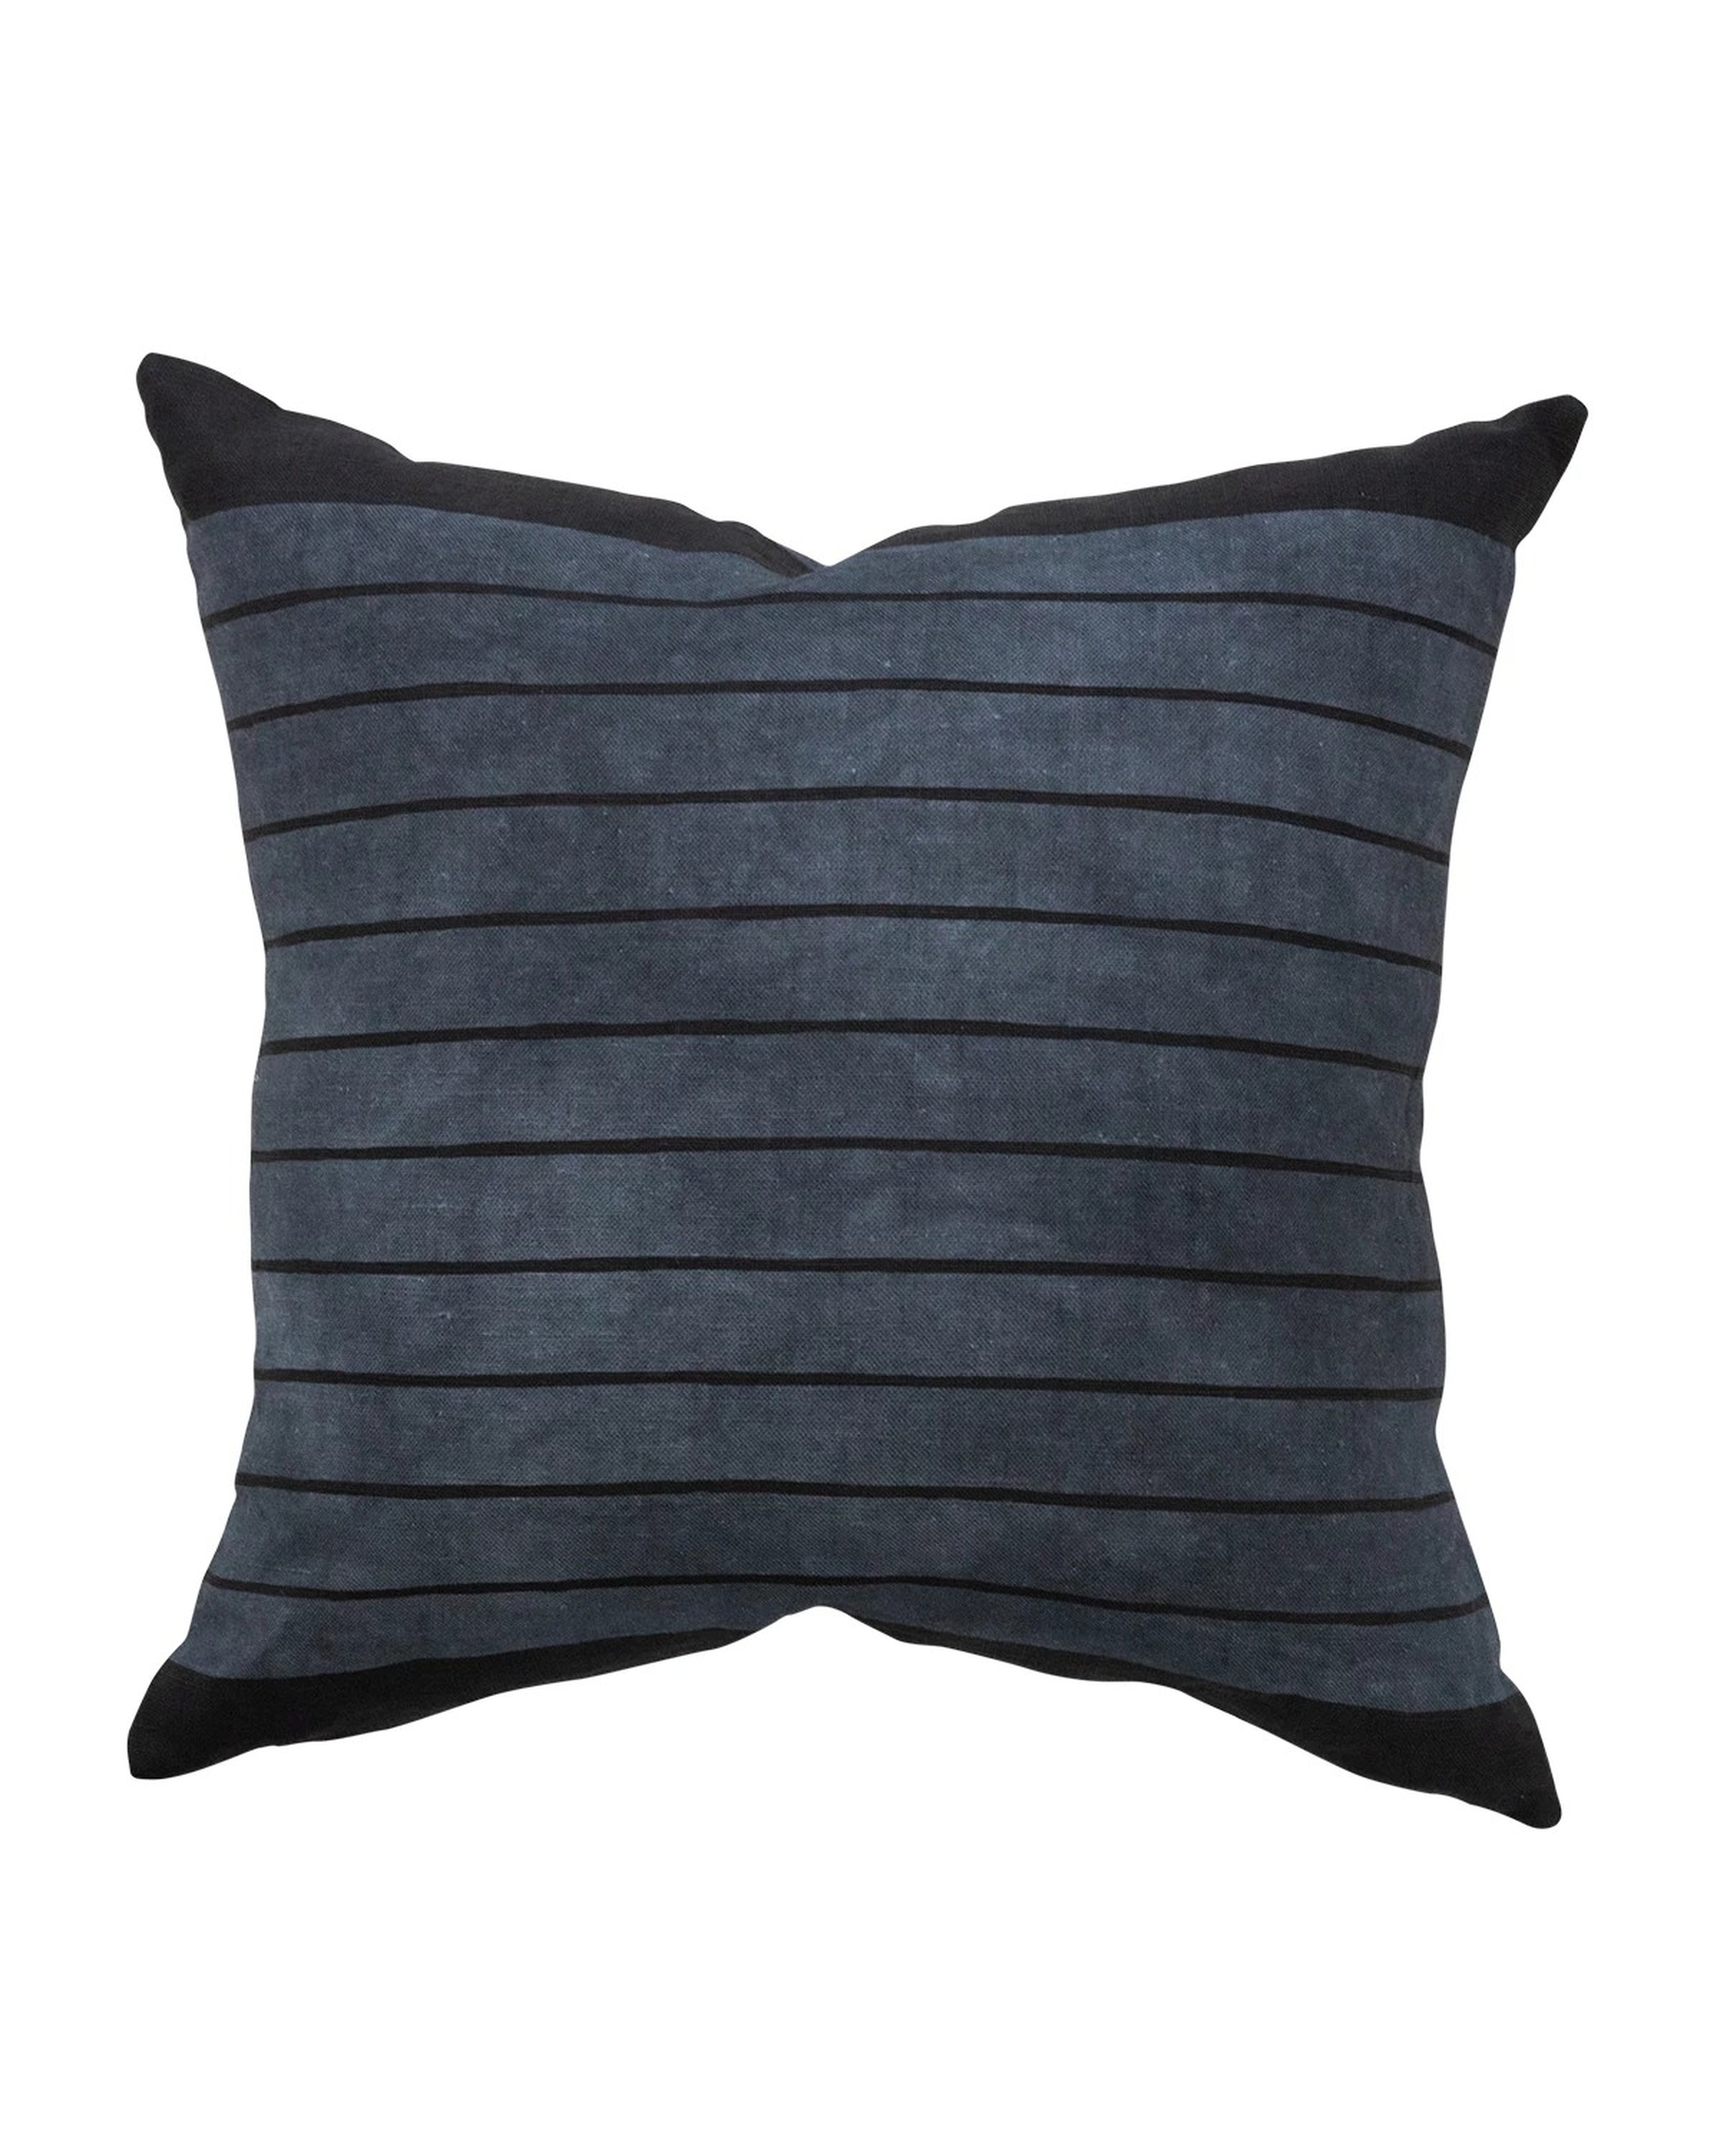 JEMINA PILLOW WITH DOWN INSERT - 22" x 22" - McGee & Co.